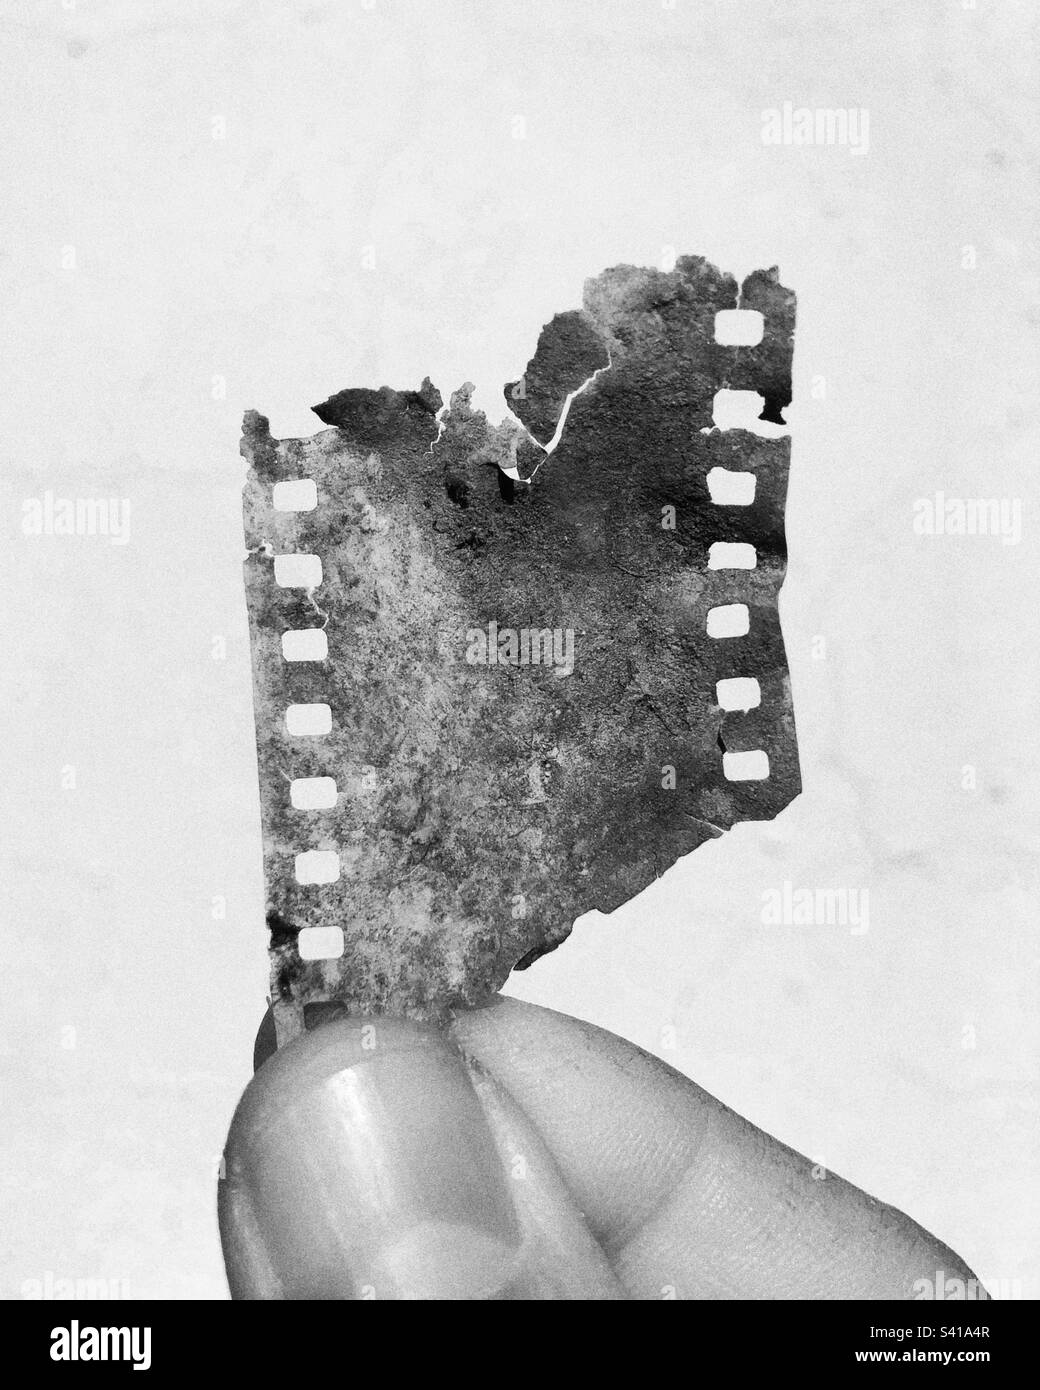 High key image of an decayed photographic film held in hand against white background Stock Photo